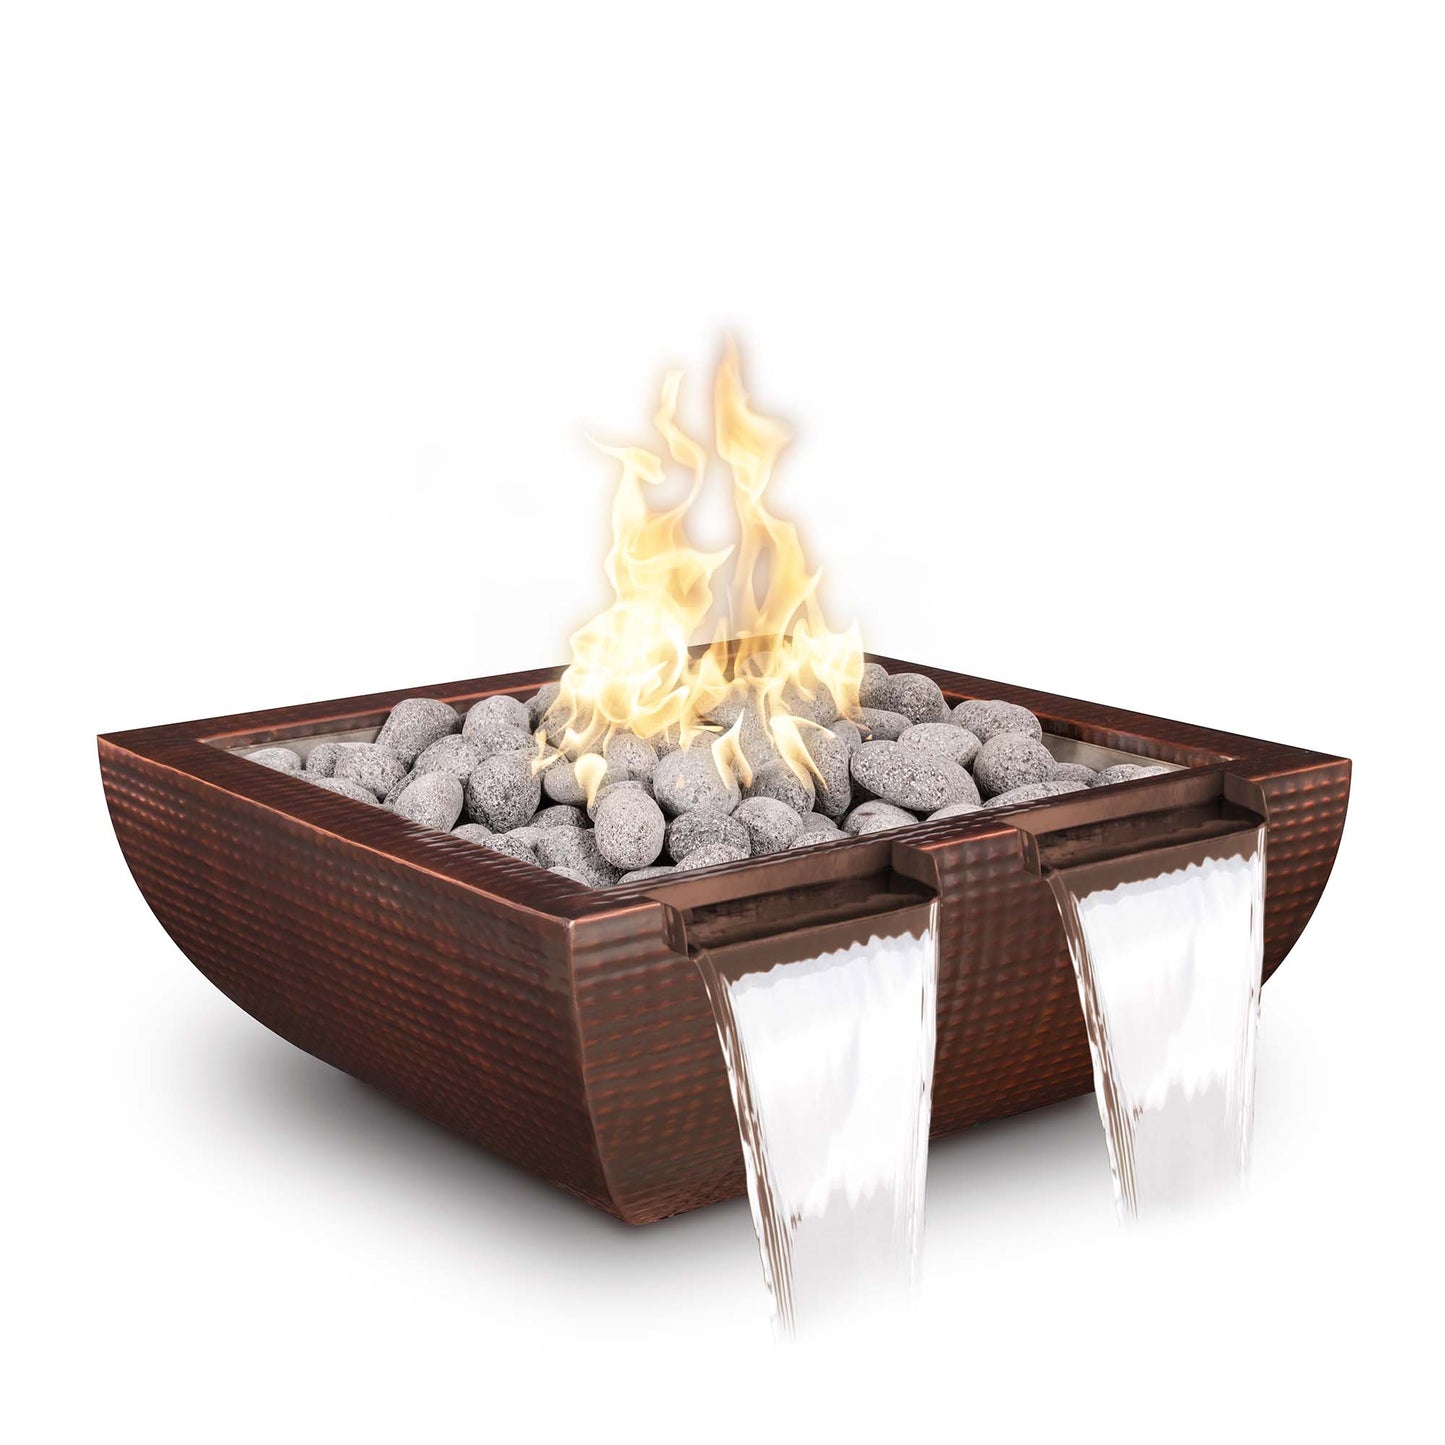 The Outdoor Plus Avalon Twin Spill 24" Pewter Powder Coated Metal Liquid Propane Fire & Water Bowl with Match Lit Ignition